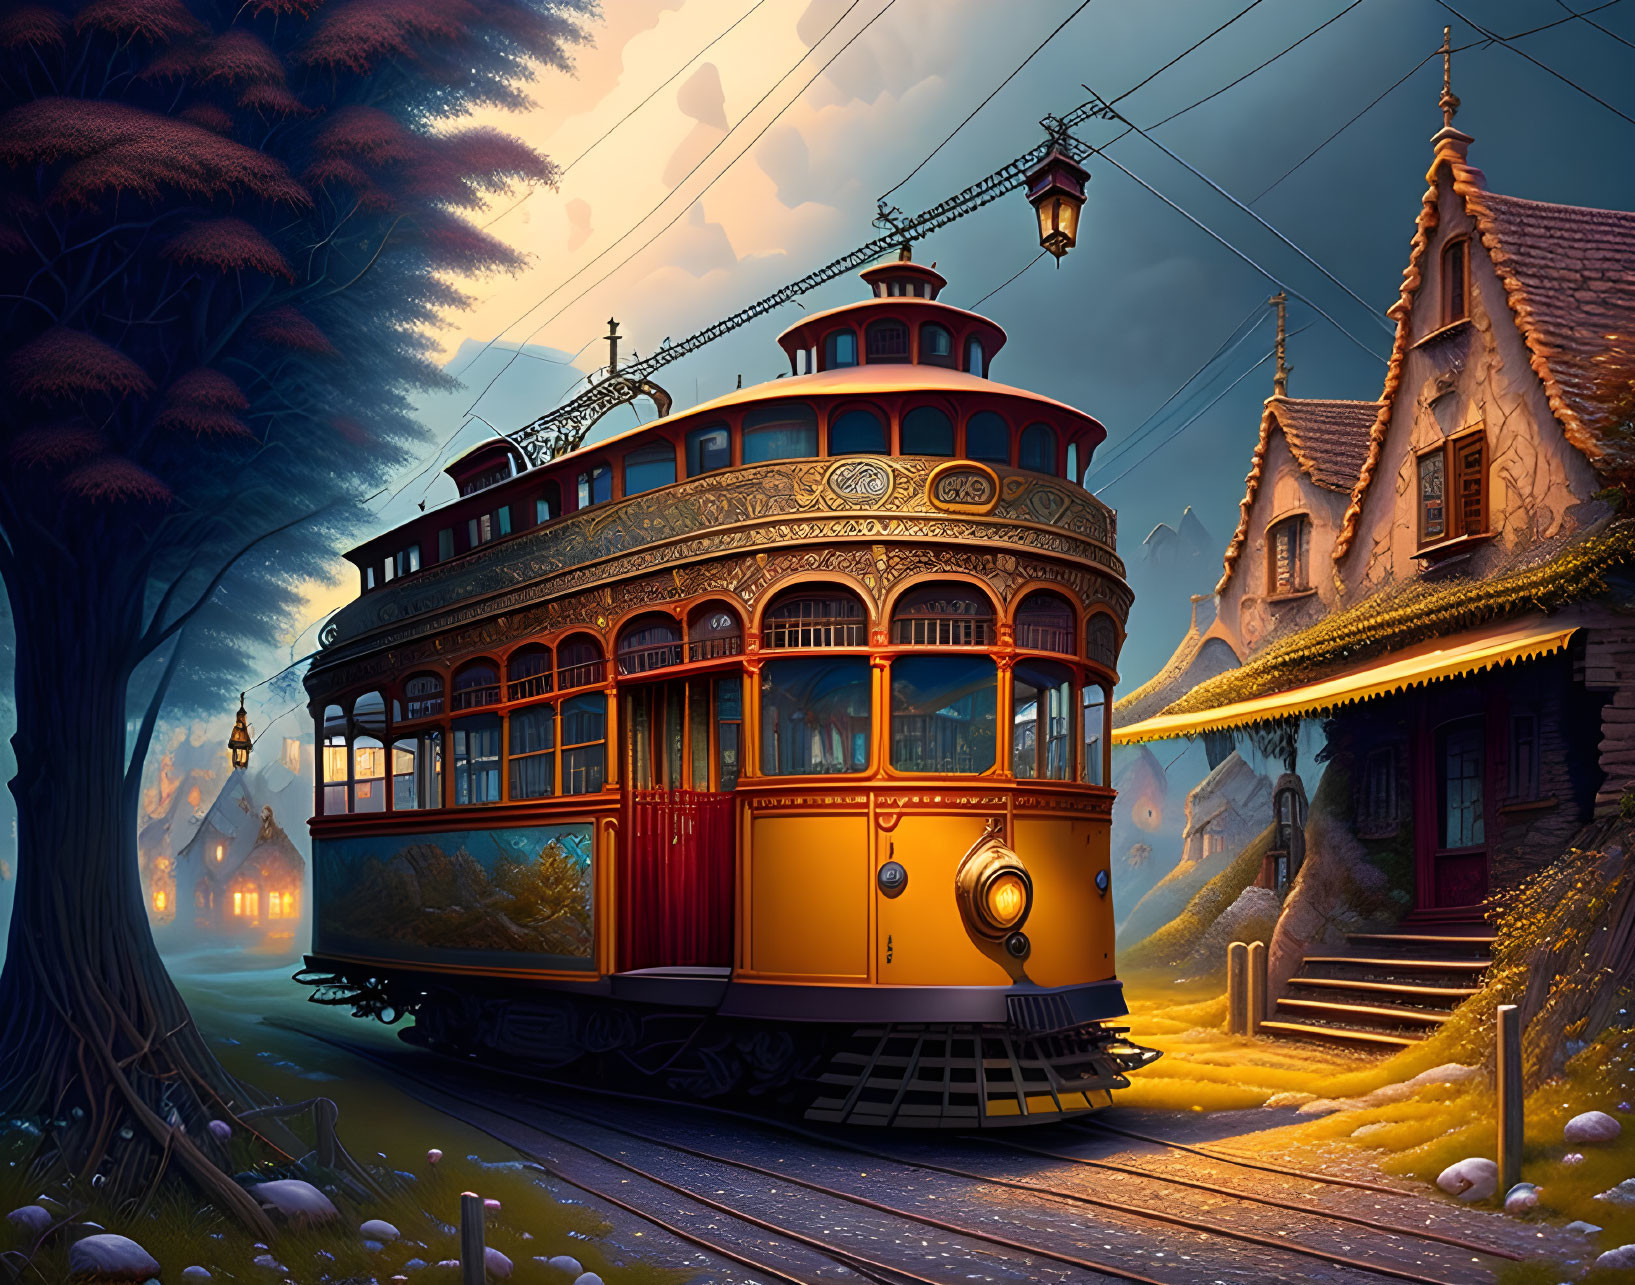 Vintage tram on tracks in twilight village with autumnal ambiance